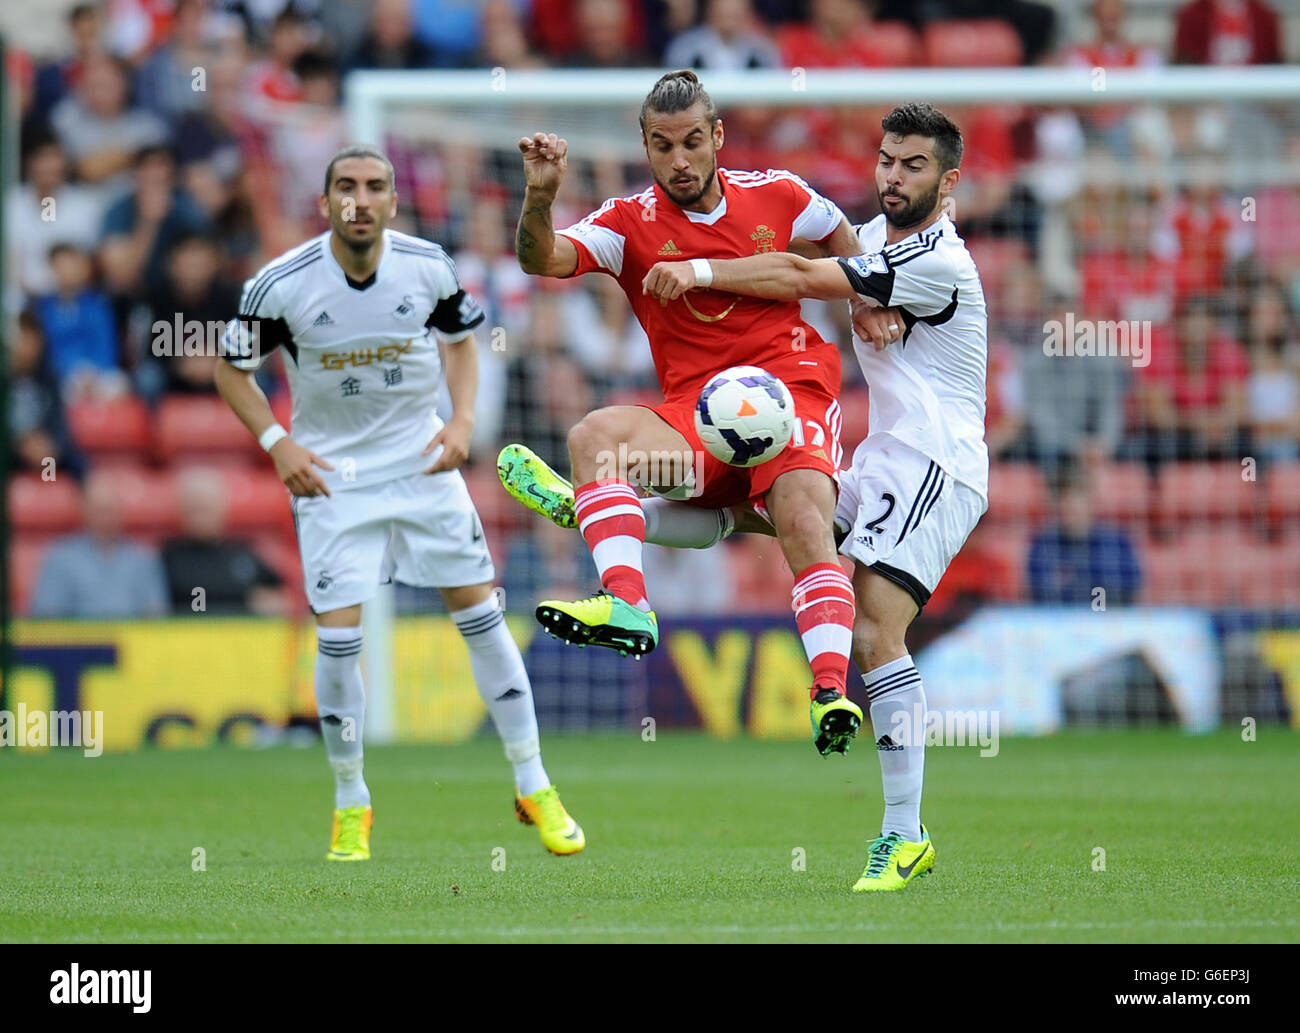 Southampton's Pablo Daniel Osvaldo (left) is tackled by Swansea's Jordi Amat during the Barclays Premier League match at St Marys, Southampton. Stock Photo